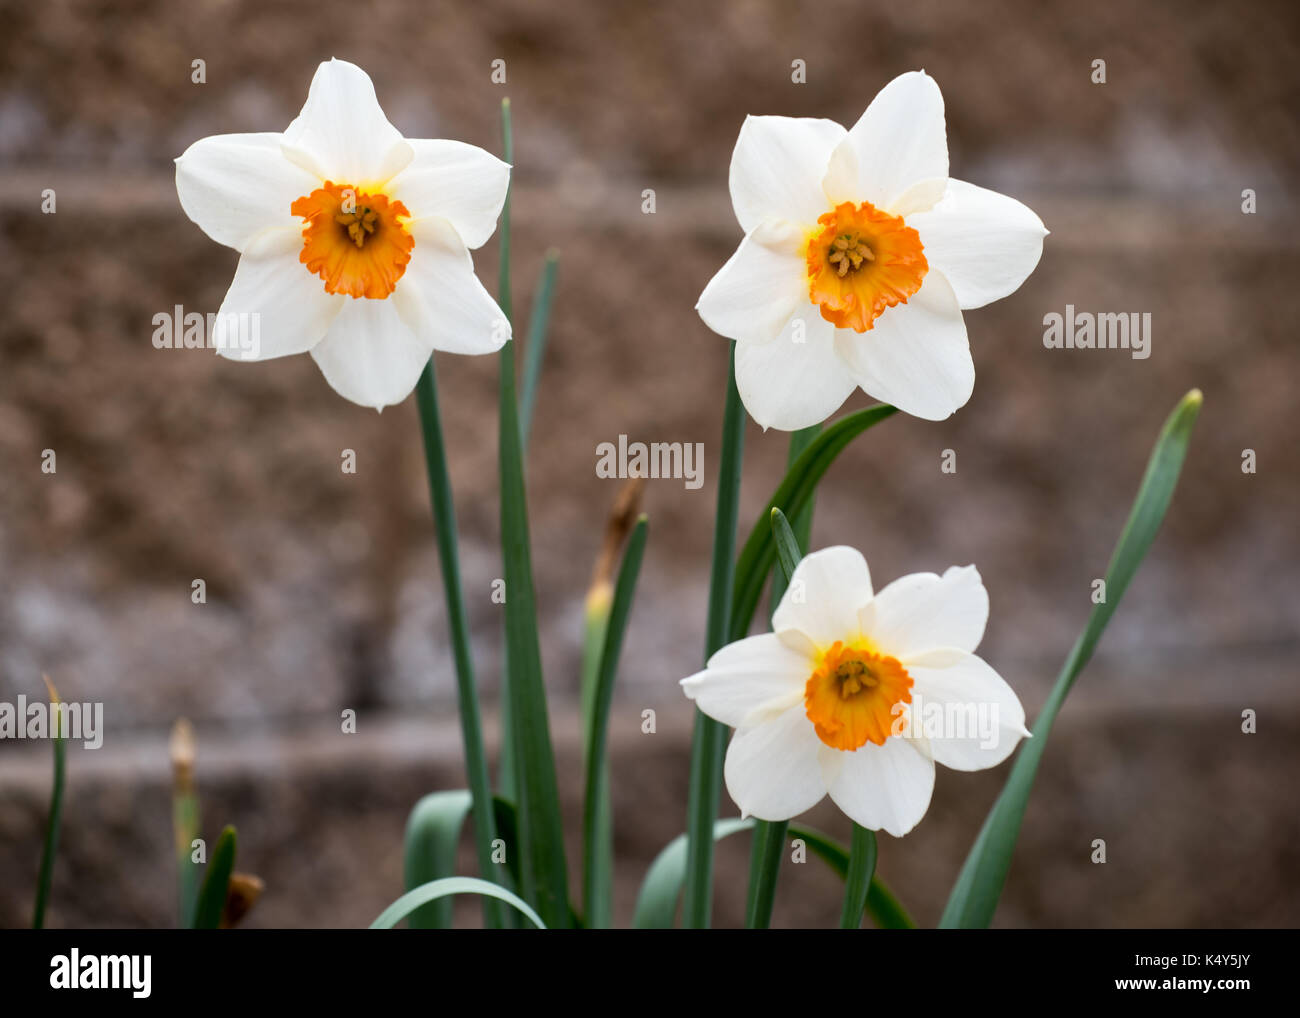 White and Orange Daffodils Stand Out against a Stone Wall Stock Photo